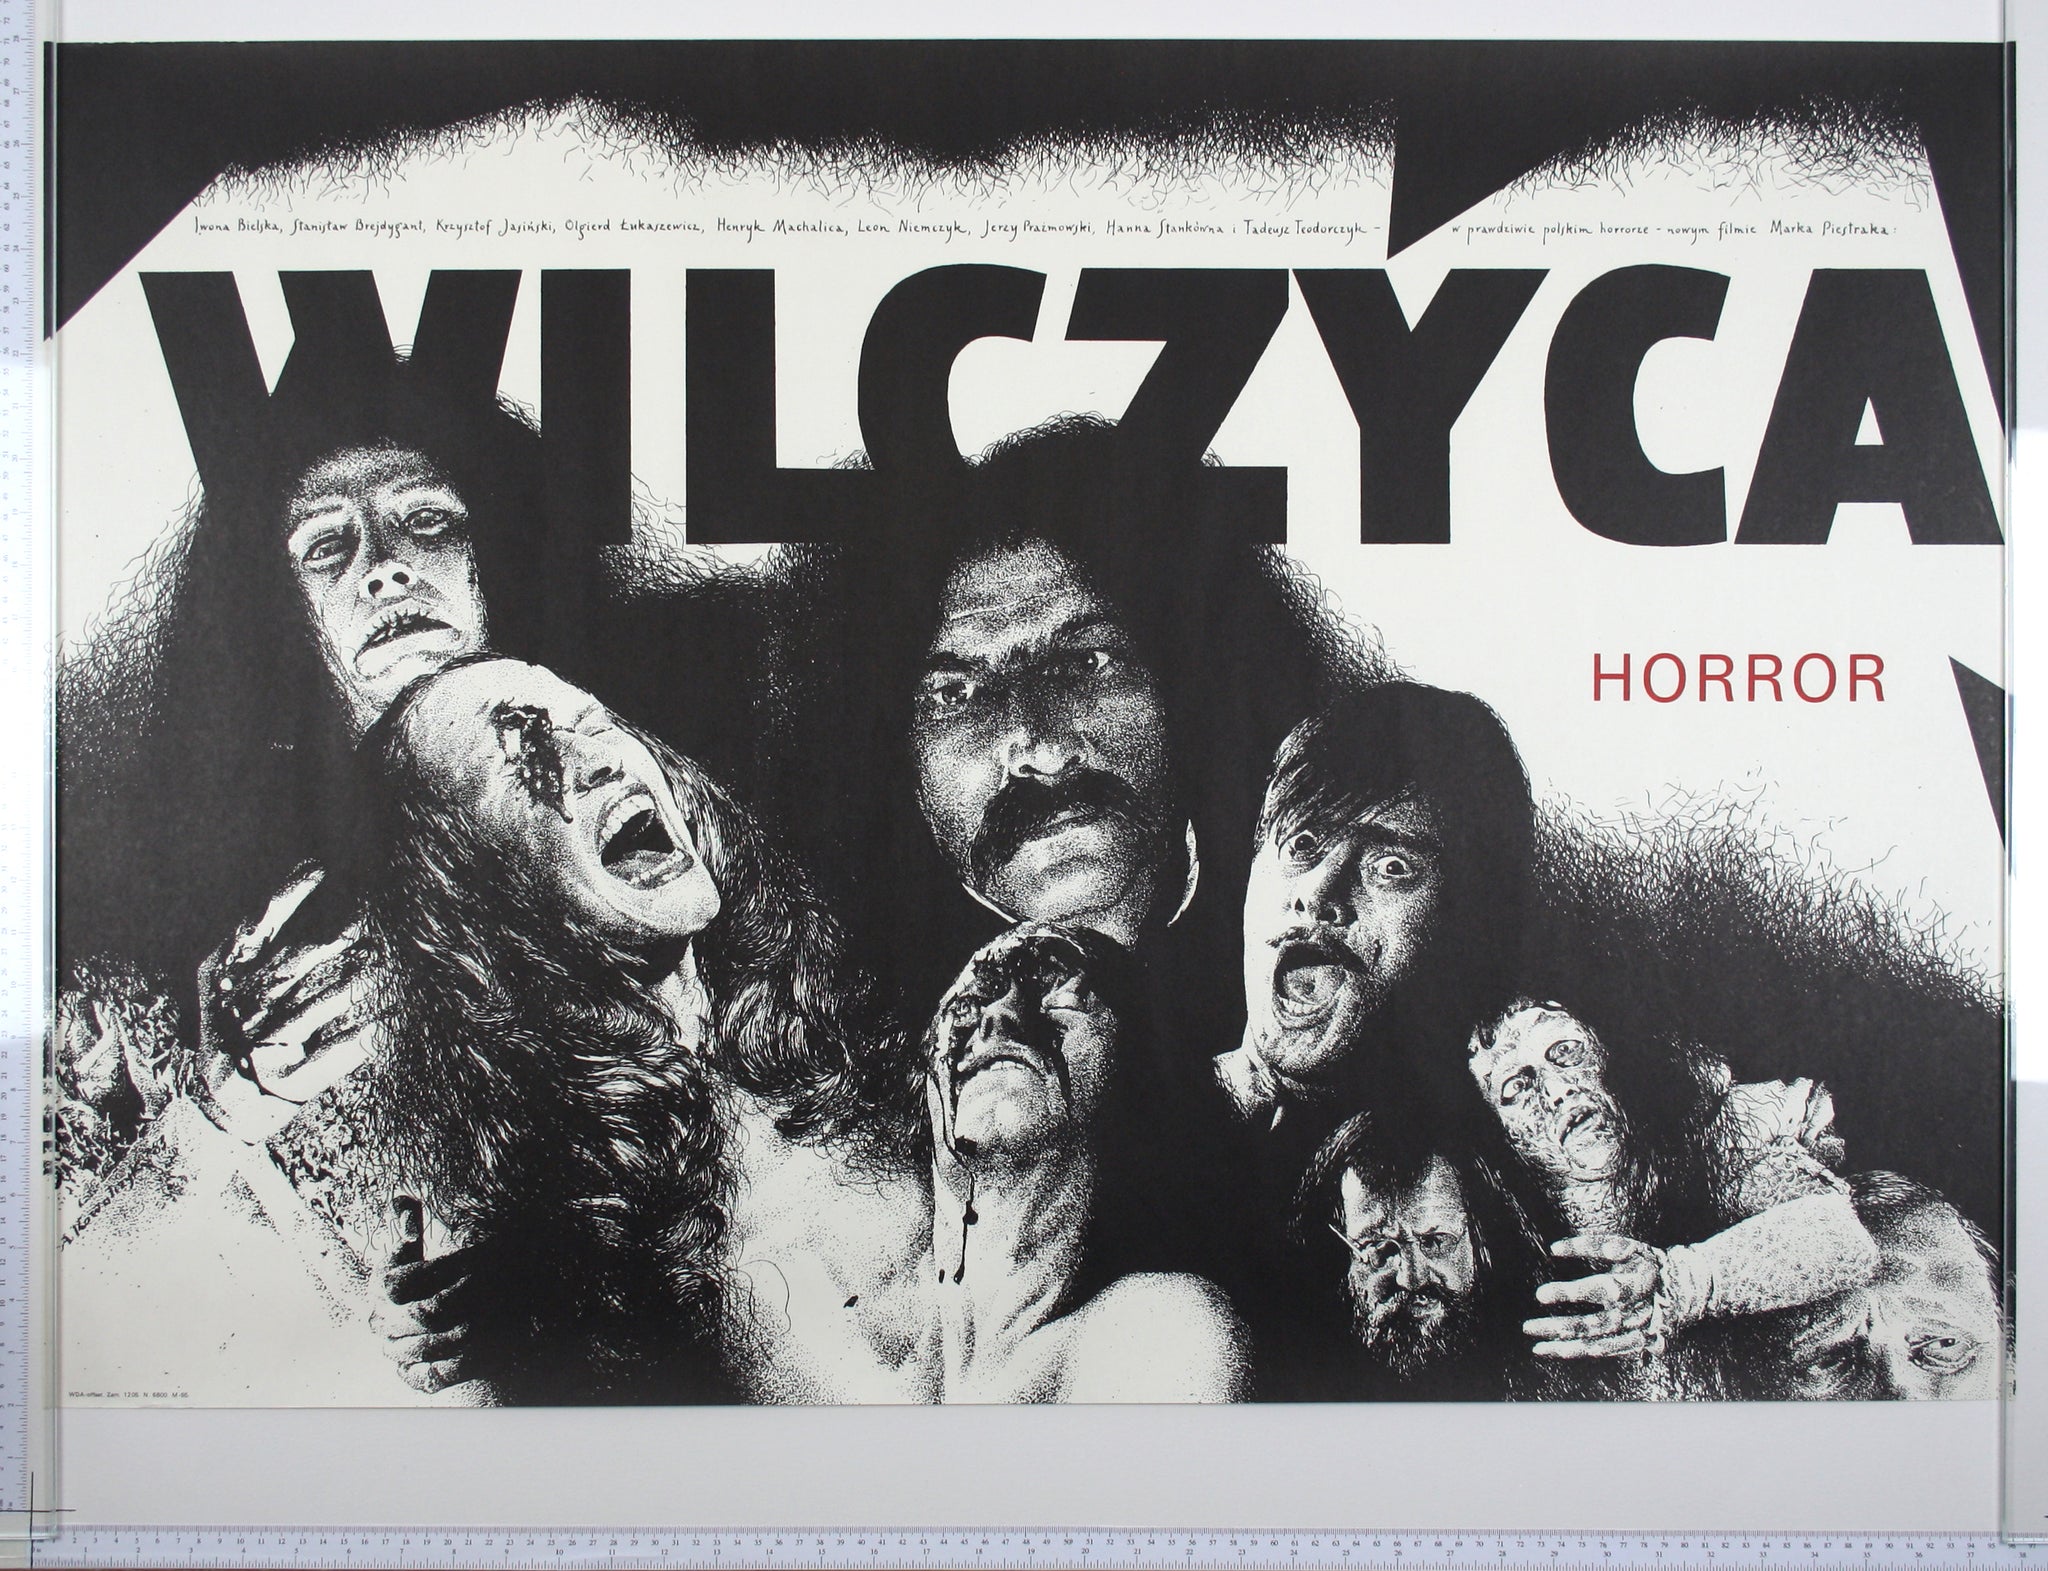 High contrast B+W artwork of werewolf undergoing transformation, as well as other shocked human faces.